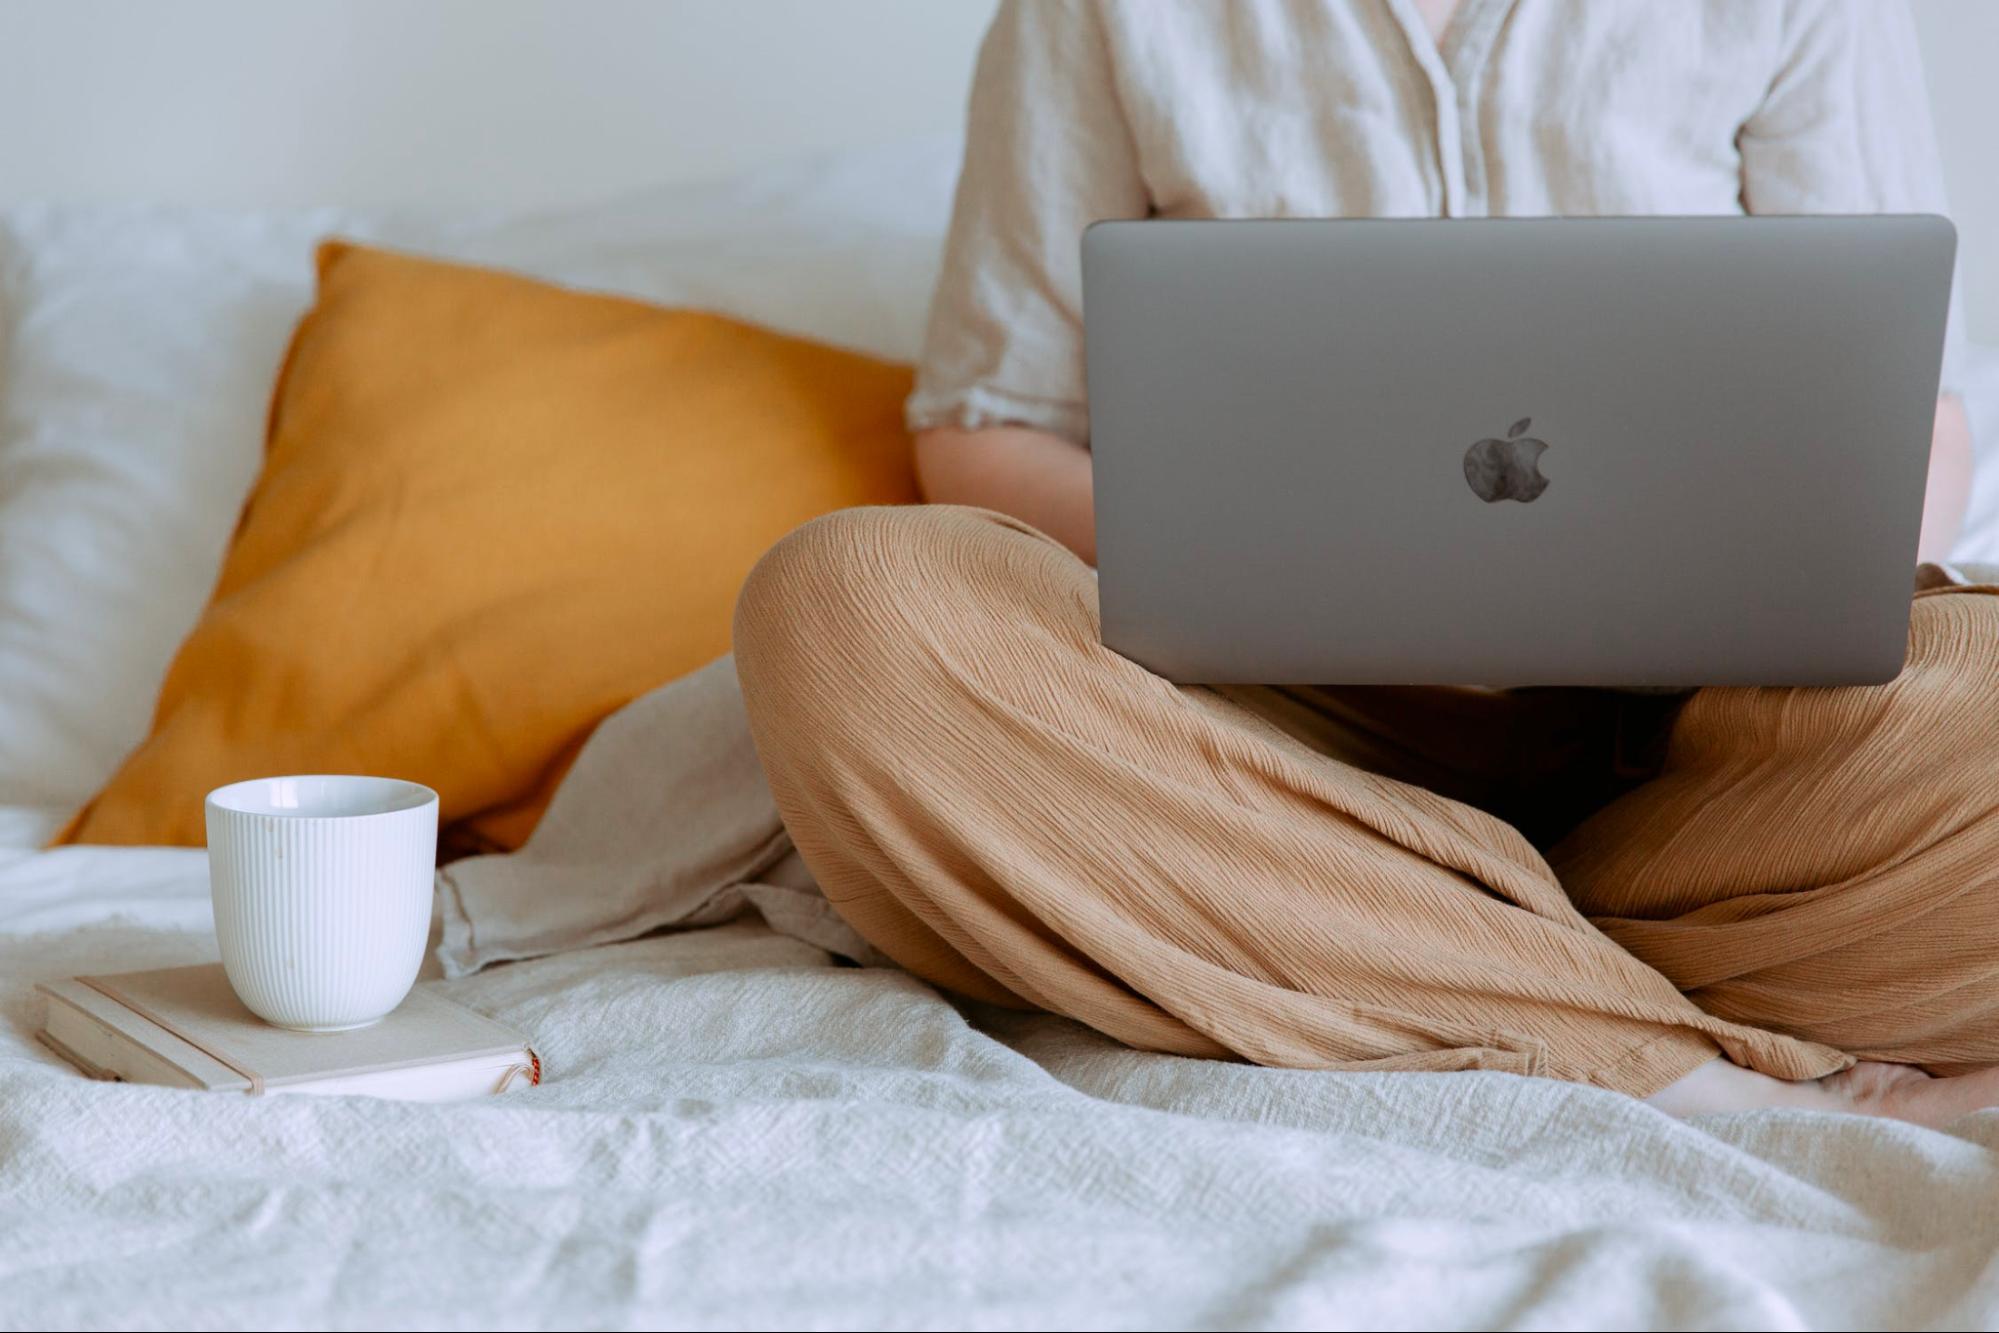 Image of a person typing at their computer on their bed, with a cup of coffee nearby.